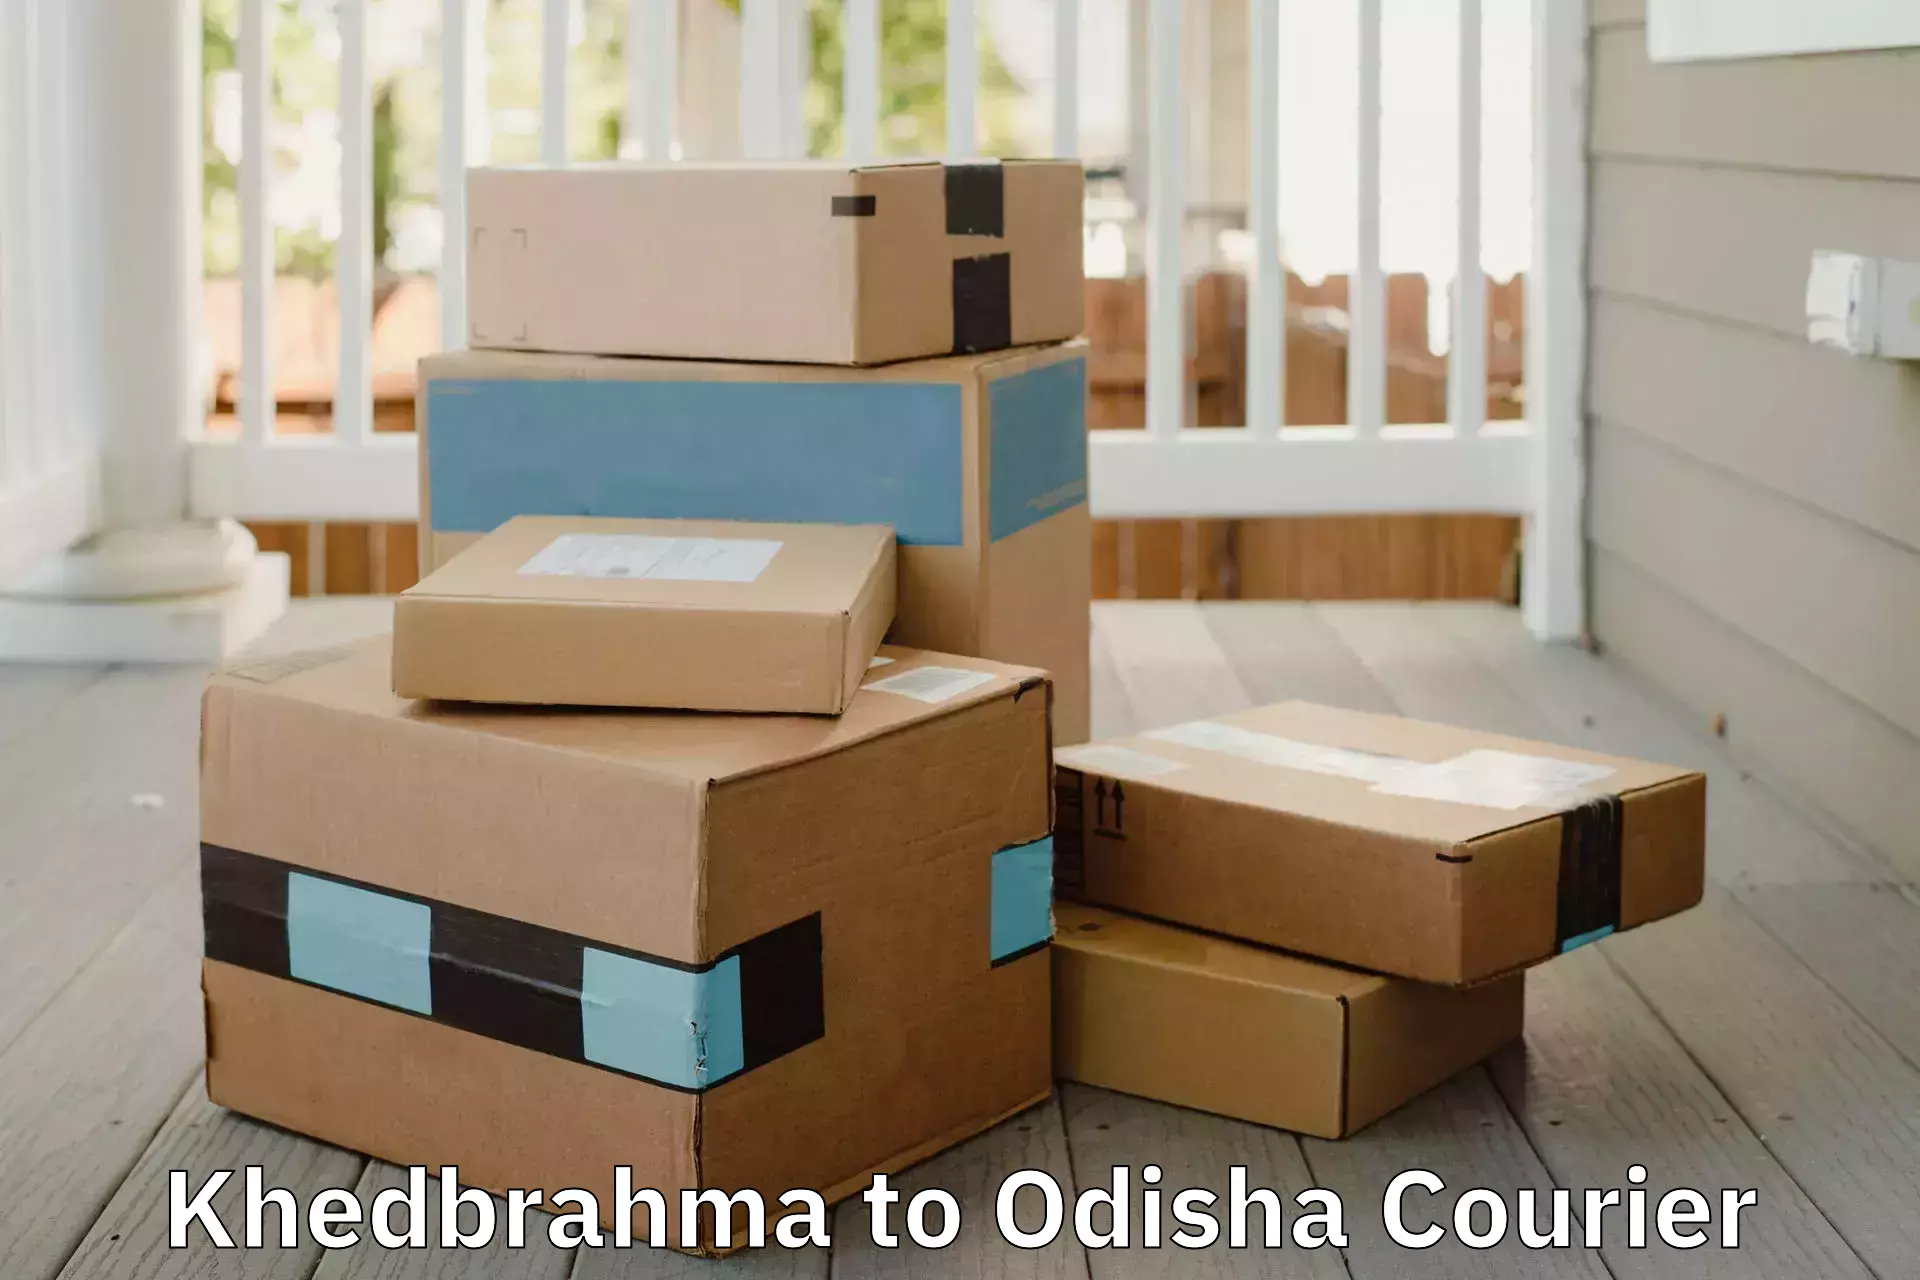 Professional packing services in Khedbrahma to Raighar